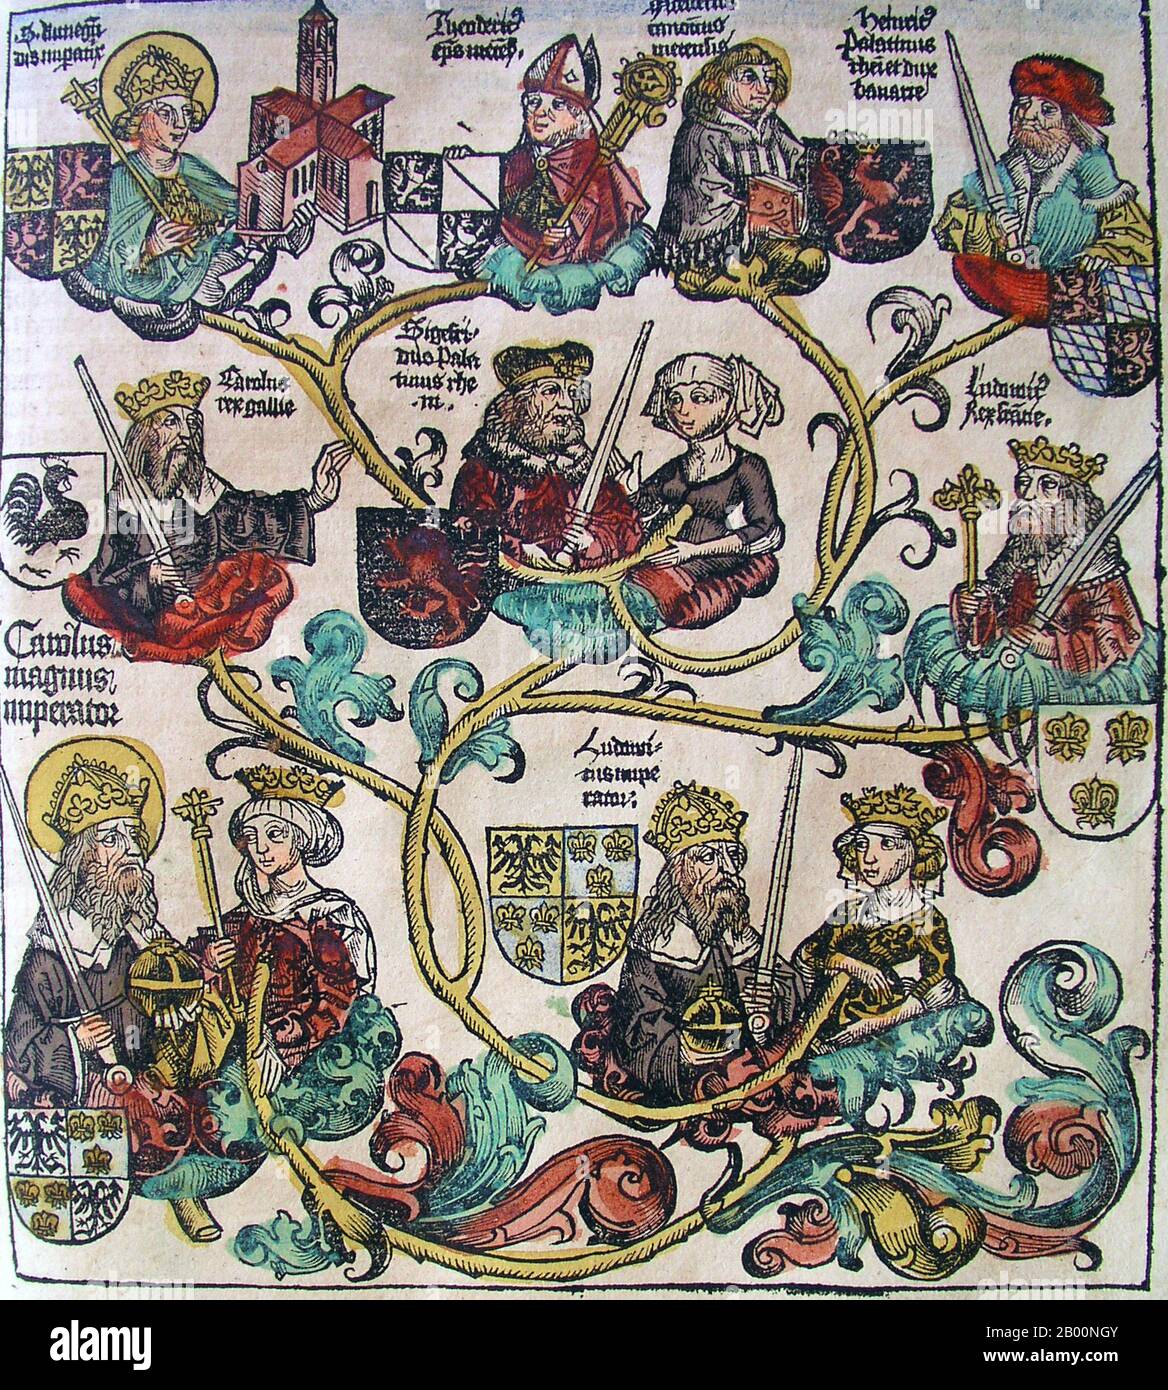 Germany: 'Genealogy of Charlemagne'. The Nuremberg Chronicle, by Hartmann Schedel (1440-1514), 1493.  The Nuremberg Chronicle is an illustrated world history. Its structure follows the story of human history as related in the Bible, including the histories of a number of important Western cities. Written in Latin by Hartmann Schedel, with a version in German translation by Georg Alt, it appeared in 1493. It is one of the best-documented early printed books. It is classified as an incunabulum, a book, pamphlet, or broadside that was printed (not handwritten) before the year 1501 in Europe. Stock Photo